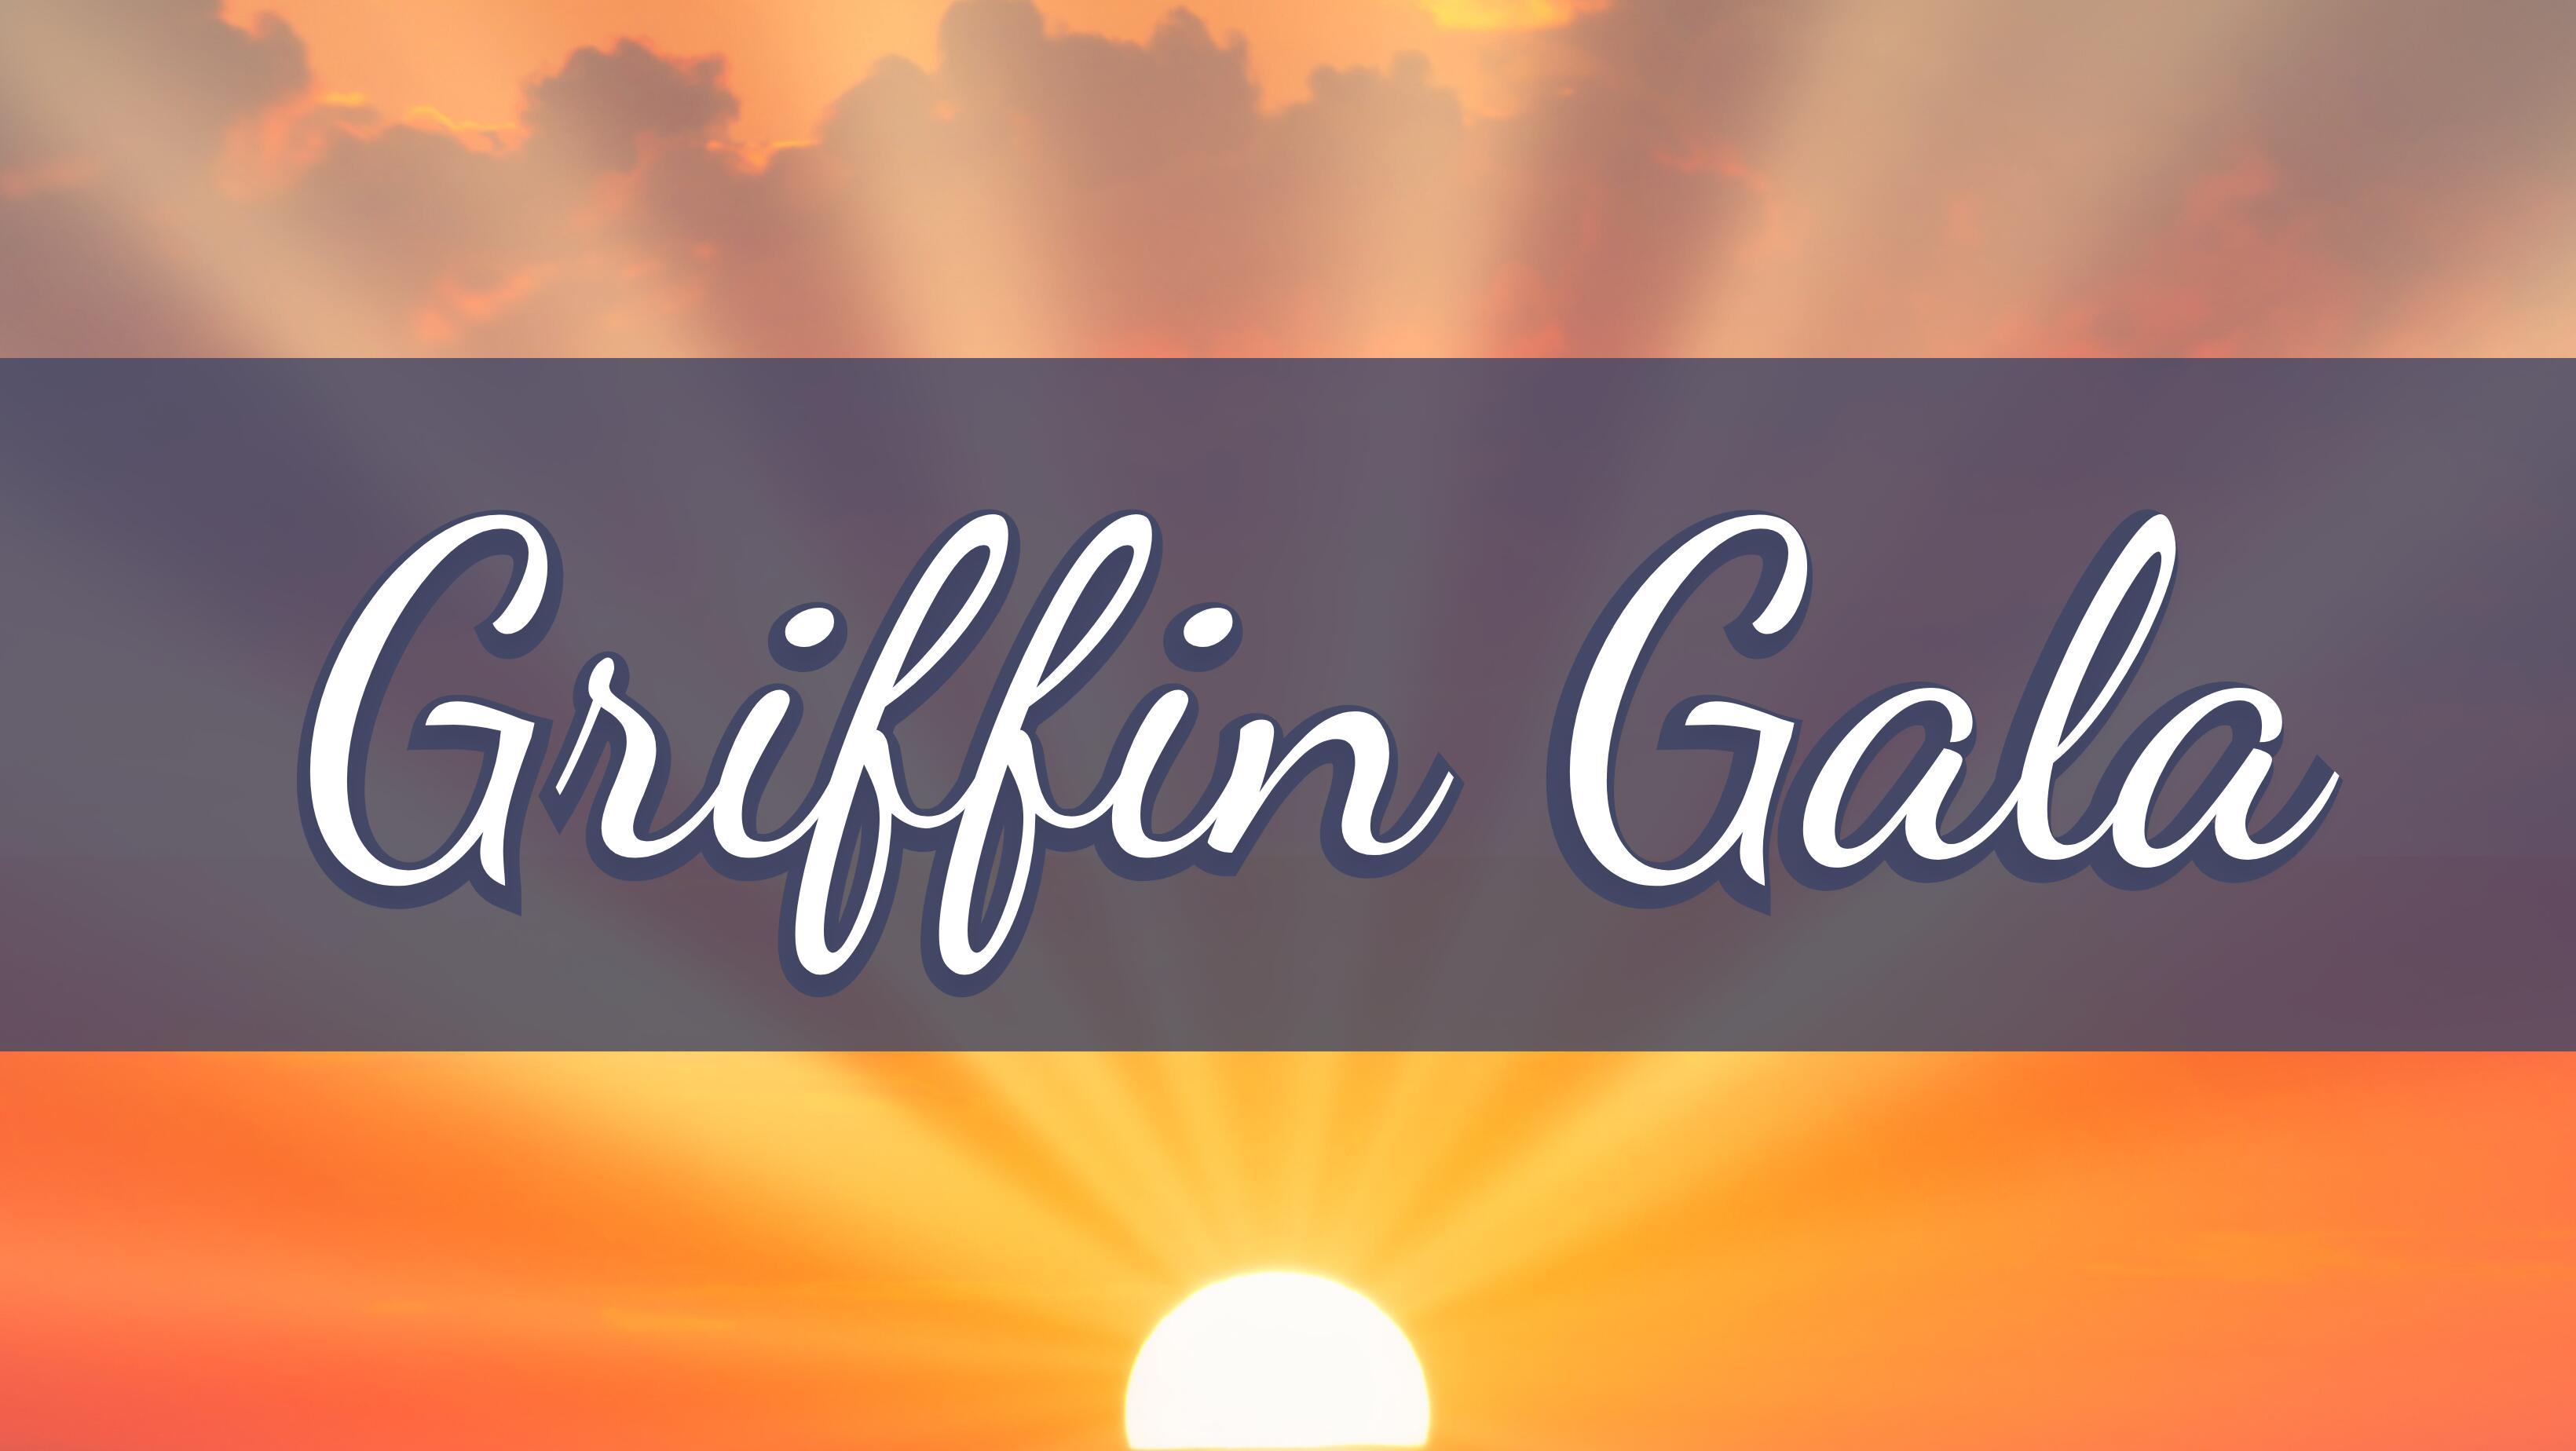 Mark your calendars for Aristoi's Annual Griffin Gala